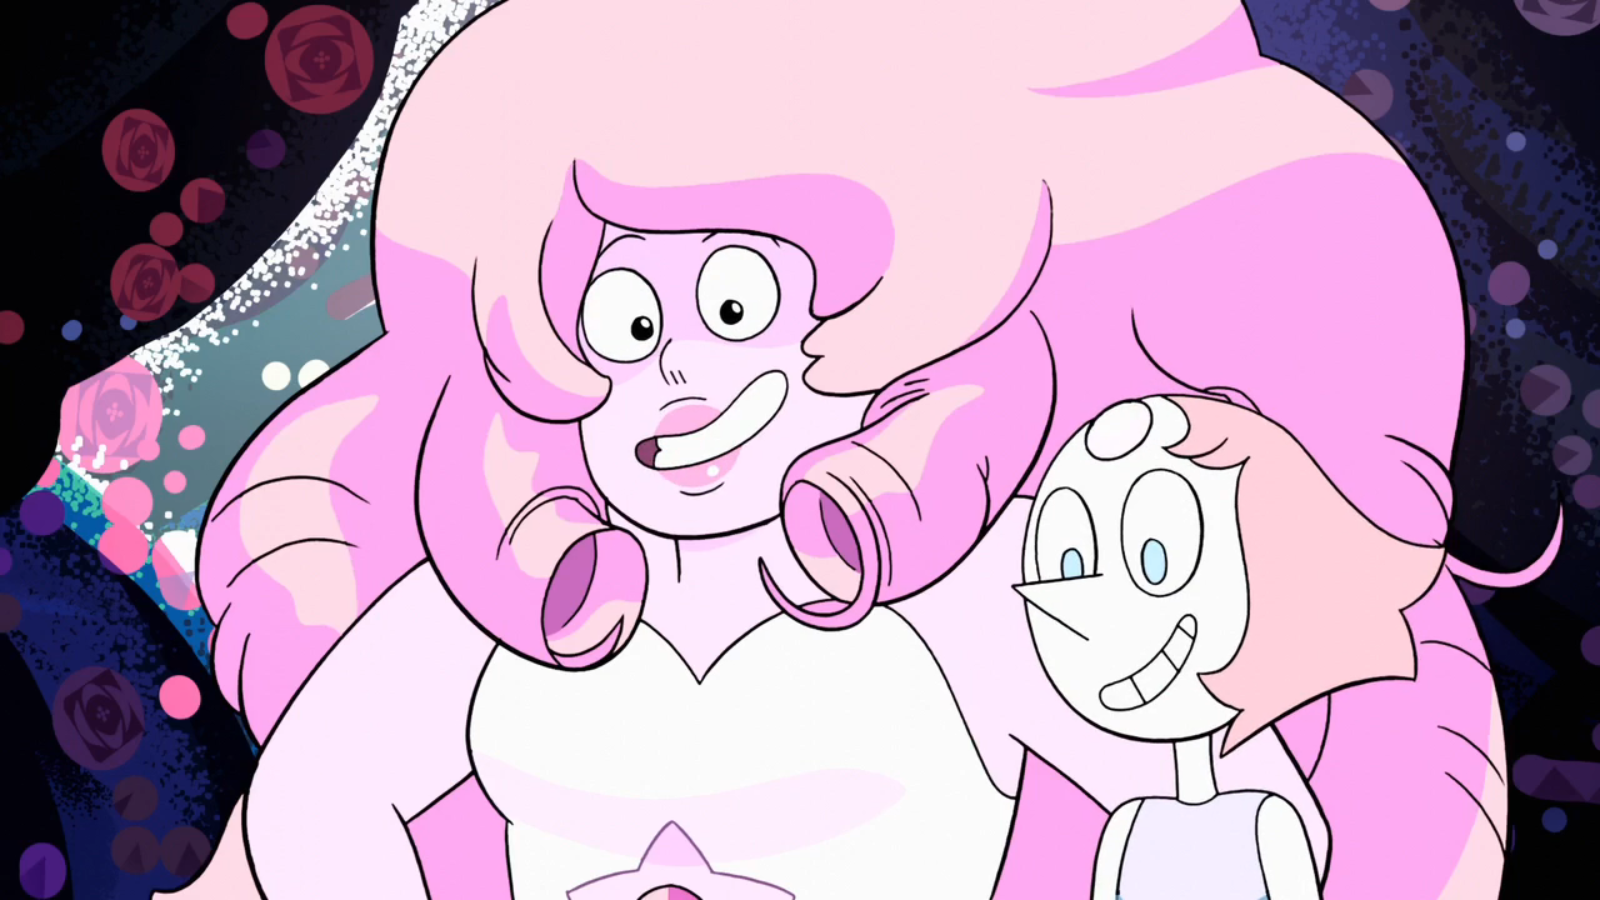 But what we don't know is how Pearl met Rose Quartz and how she jo...